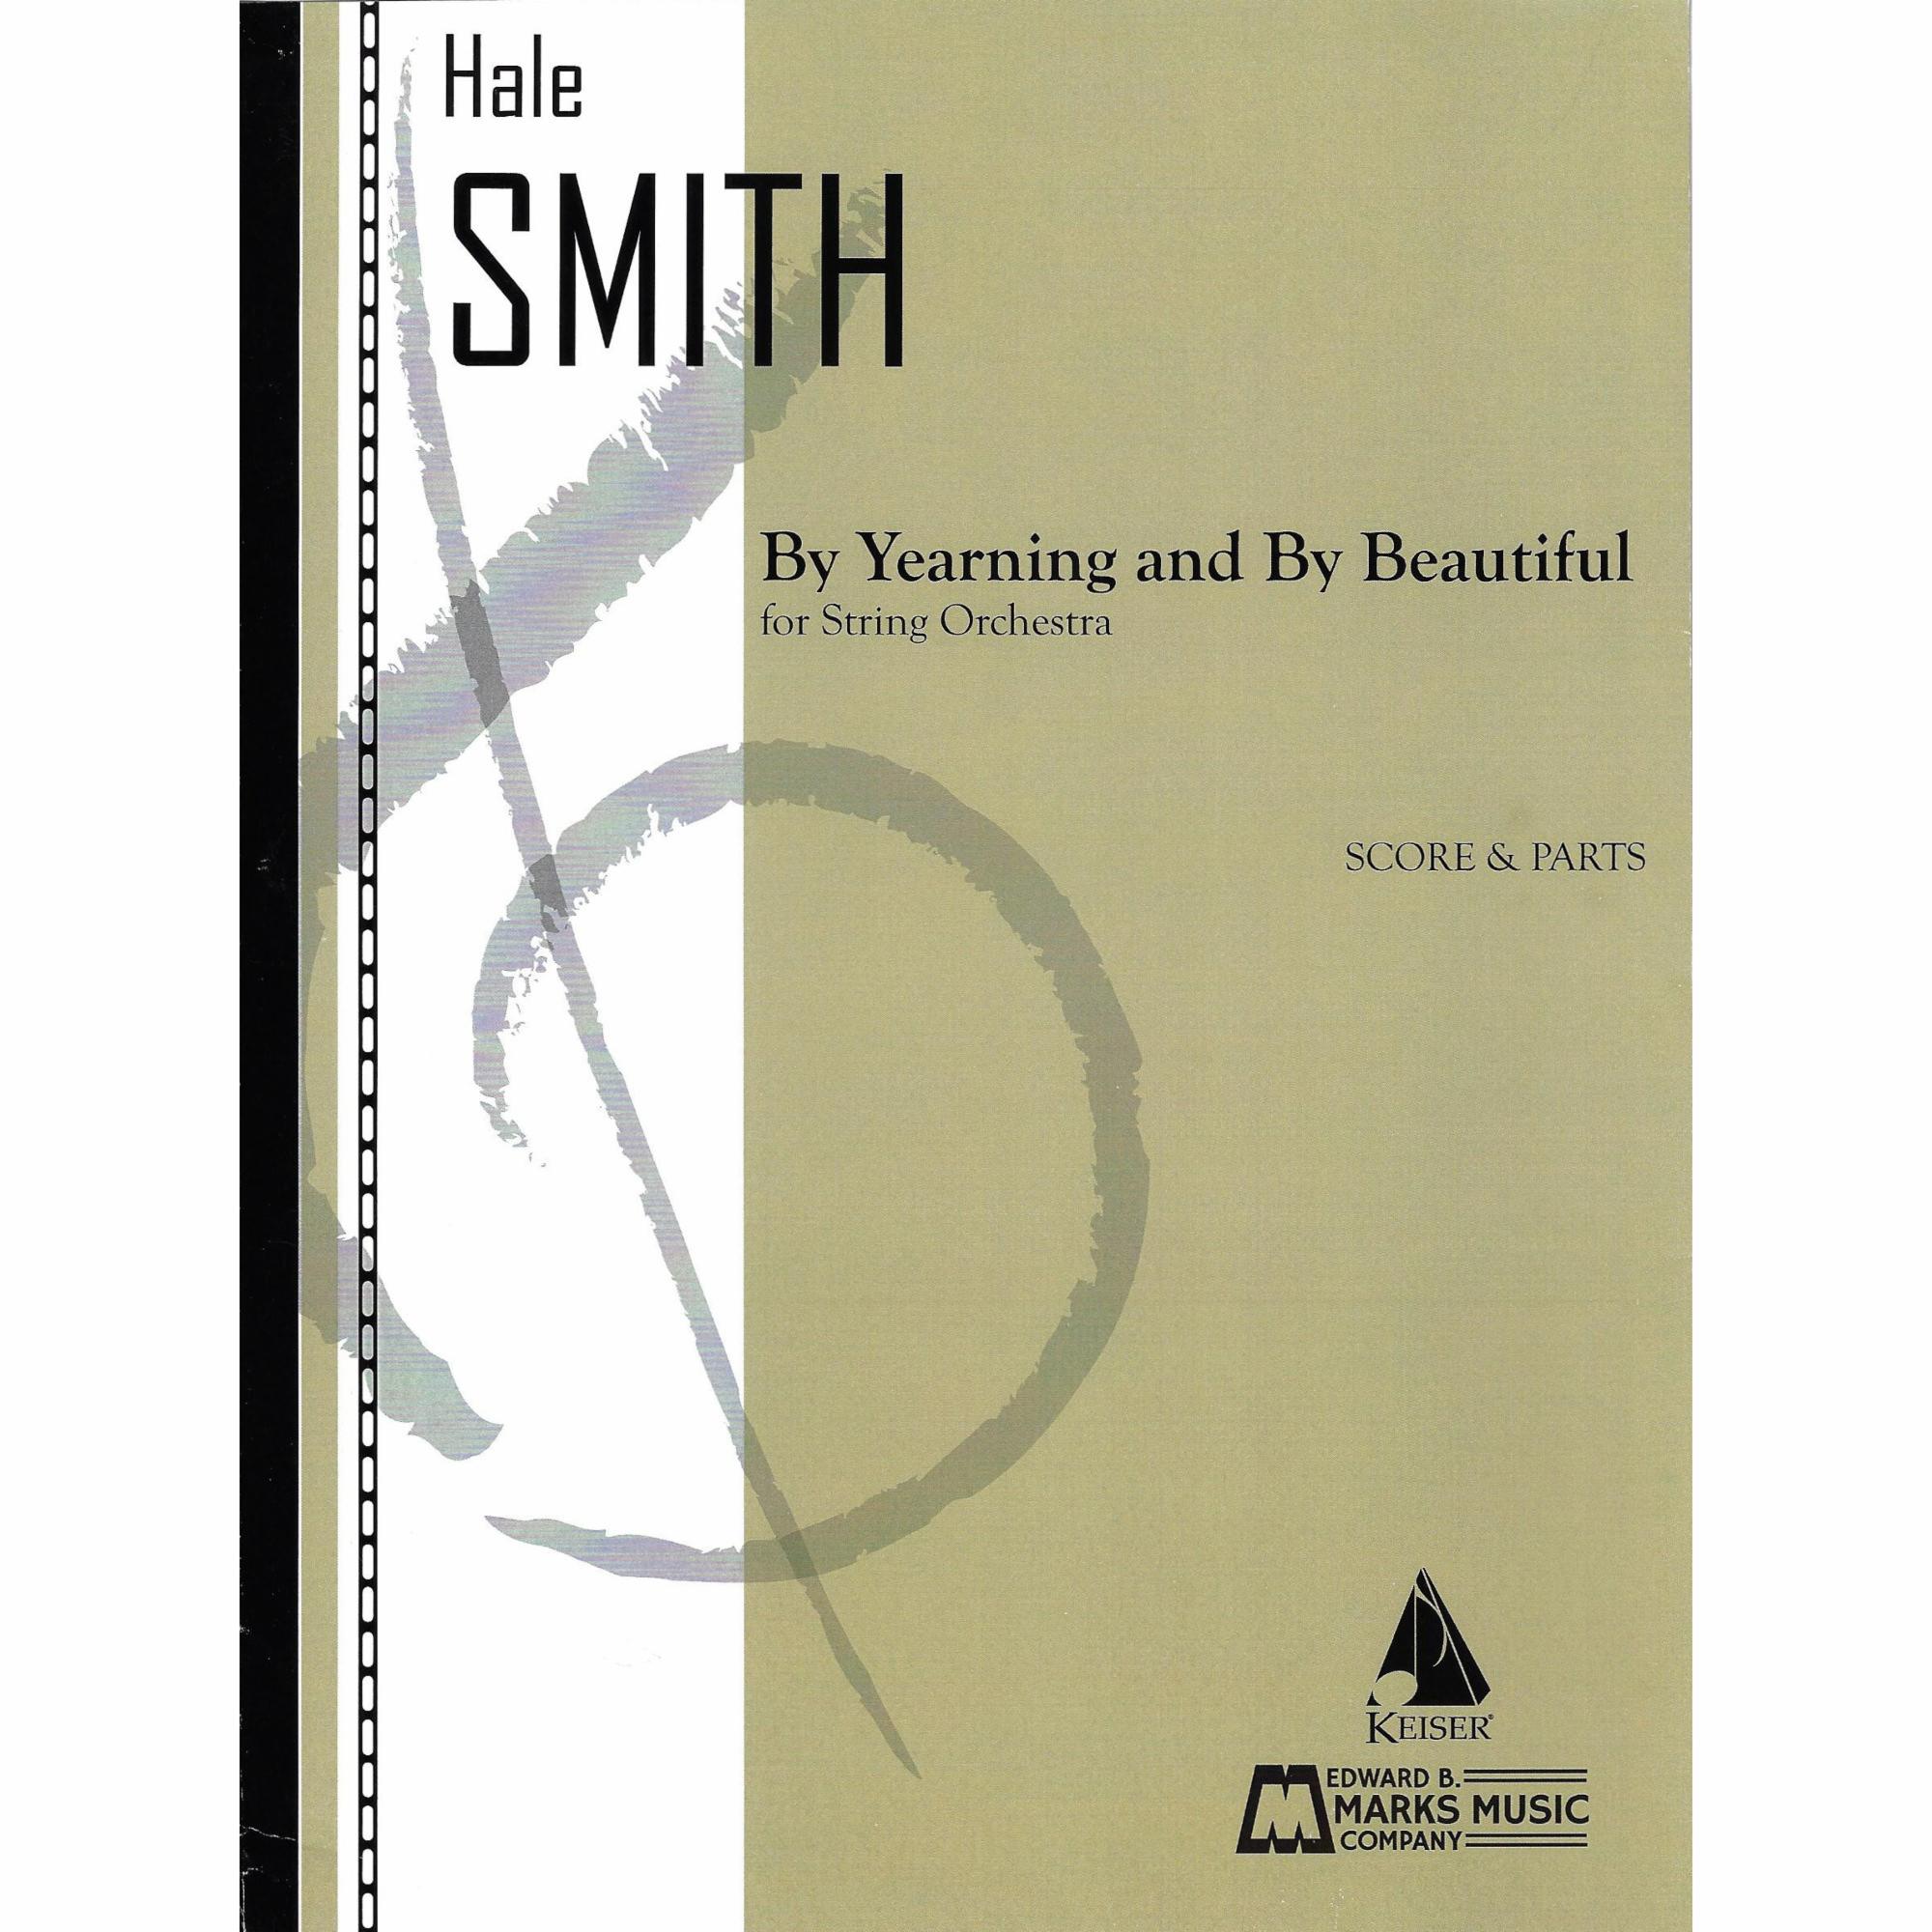 Smith -- By Yearning and By Beautiful for String Orchestra